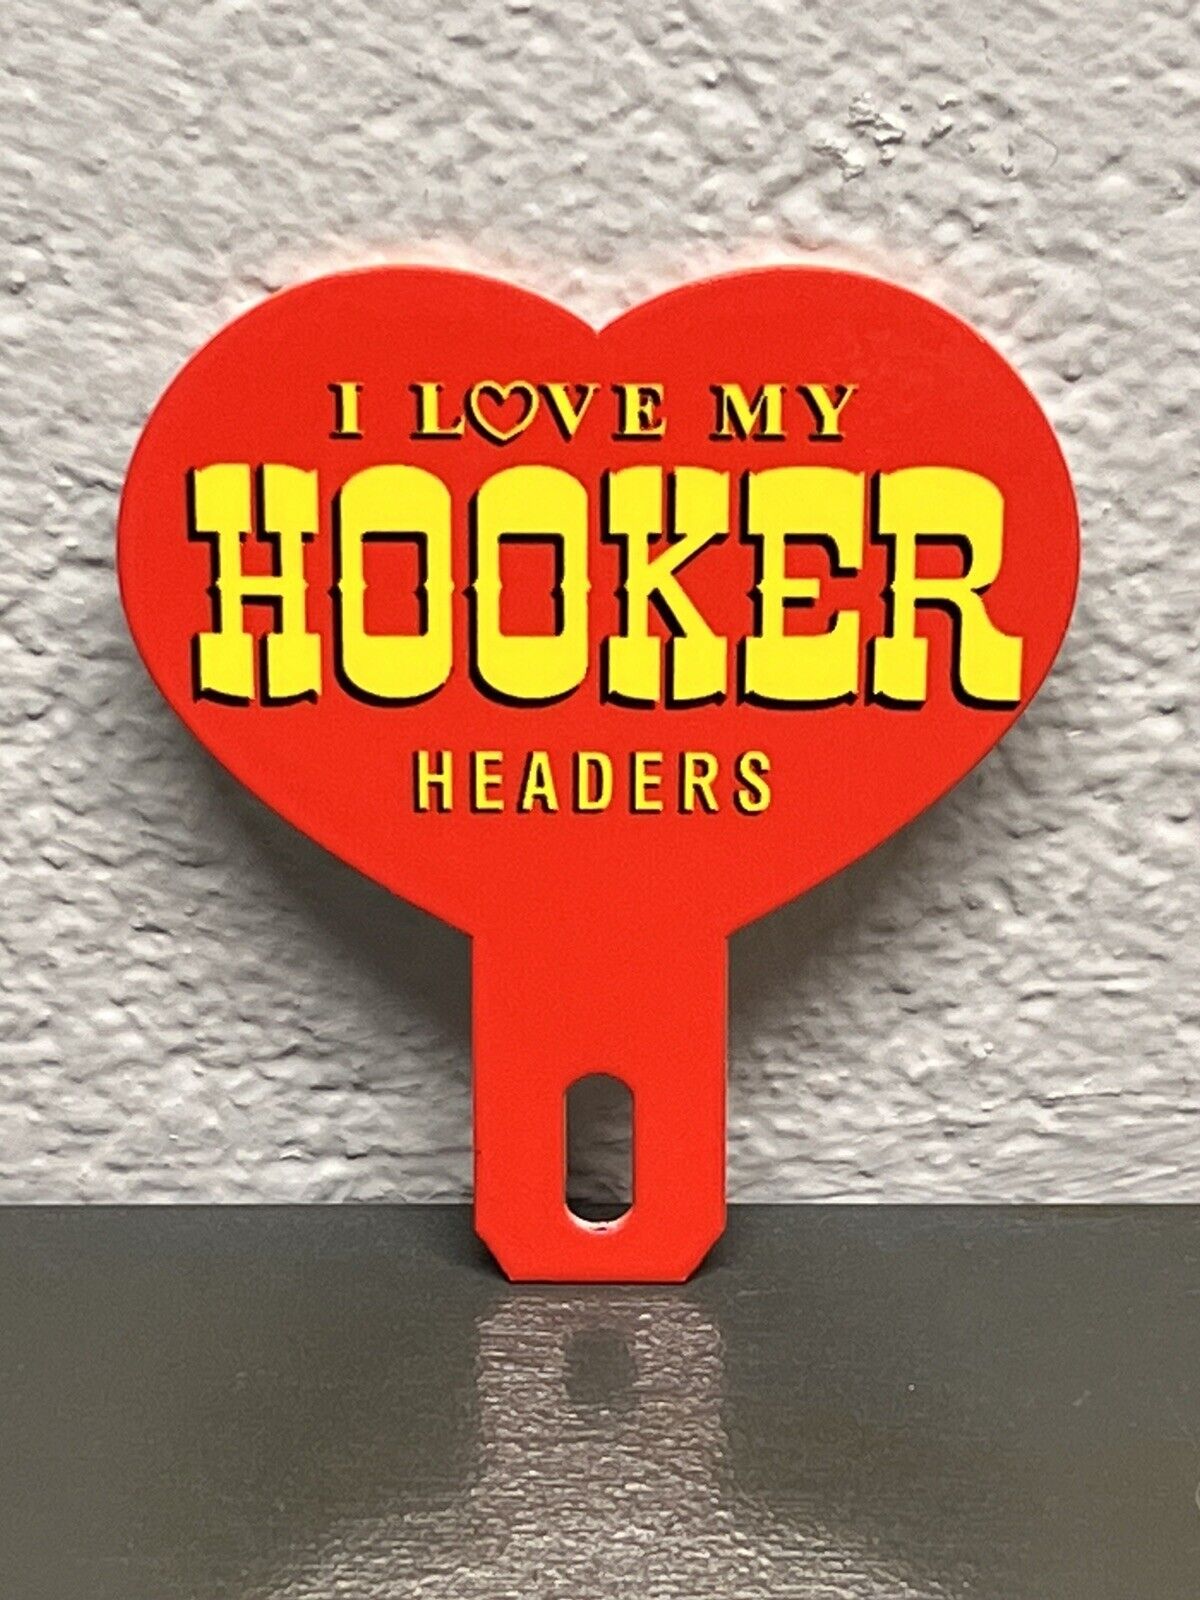 I Love My HOOKER HEADERS Metal Plate Topper Sign Sales Service Station Gas Oil